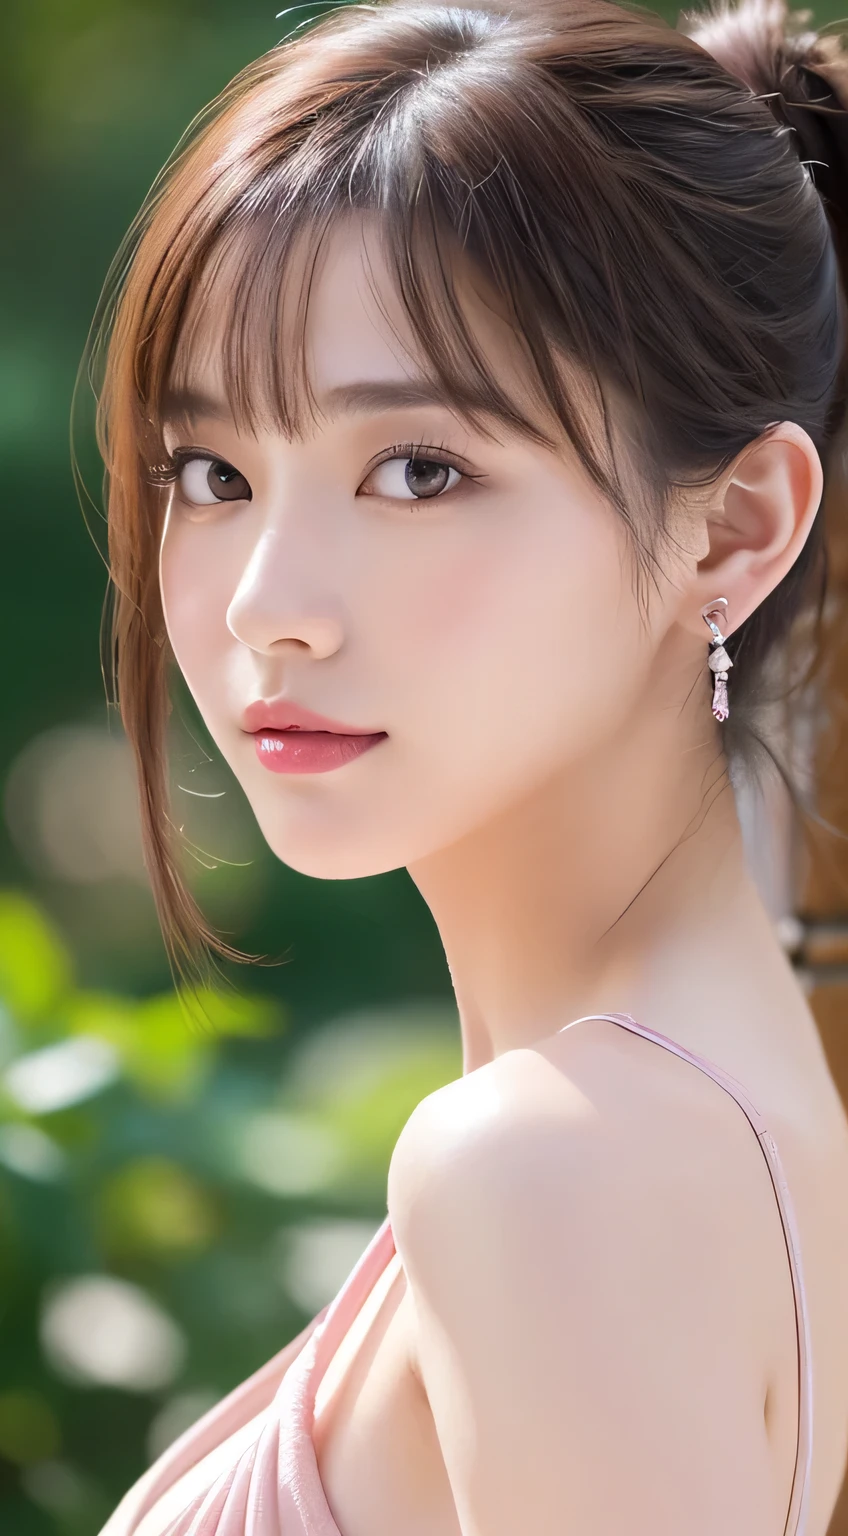 ((highest quality, 8K, masterpiece :1.3)), (realistic, Photoreal:1.4), sharp focus：1.2, 
Bright colors, professional level, shallow depth of field, 
20-year-old, 1 person, A beautiful face with intelligence, 
Supple body :1.3, model body shape:1.5, 頭w:1.4, perfect style：1.4, 
narrow shoulders, beautiful clavicle, long and thin legs, The beauty of slim abs :1.2, thin waist :1.2, 
super detailed skin, Fair skin, Shiny skin, 
super detailed face, slim facial contour, beautiful small face, Beautiful lined nose, 
super detailed eyes, long slit eyes, brown eyes, double eyelid, beautiful thin eyebrows, fine long eyelashes, 
super detailed lips, plump lips, glossy pink lips, flushed cheeks, beautiful teeth, 
Beautiful actress&#39;s ennui makeup, pink lipstick, (necklace, earrings), 
milk greige hair, delicate soft hair, 
(hair up, short hair, ponytail:1.2), layer cut, (dull bangs:1.2), 
(Dress up with trendy fashion:1.2), 
gentle smile, open mouth half way, Enchanted expression, stare at the camera, 
dynamic lighting, ((Hasselblad Photos)), 

(She lies on her back in a sexy pose:1.3), 
(perfect breast shape, B cup:1.2), It is a small pale pink areola.,  
(She has a cute plump butt, My thighs are dazzling), 
(View from the front, pay attention to the nipples, full body portrait:1.5), 